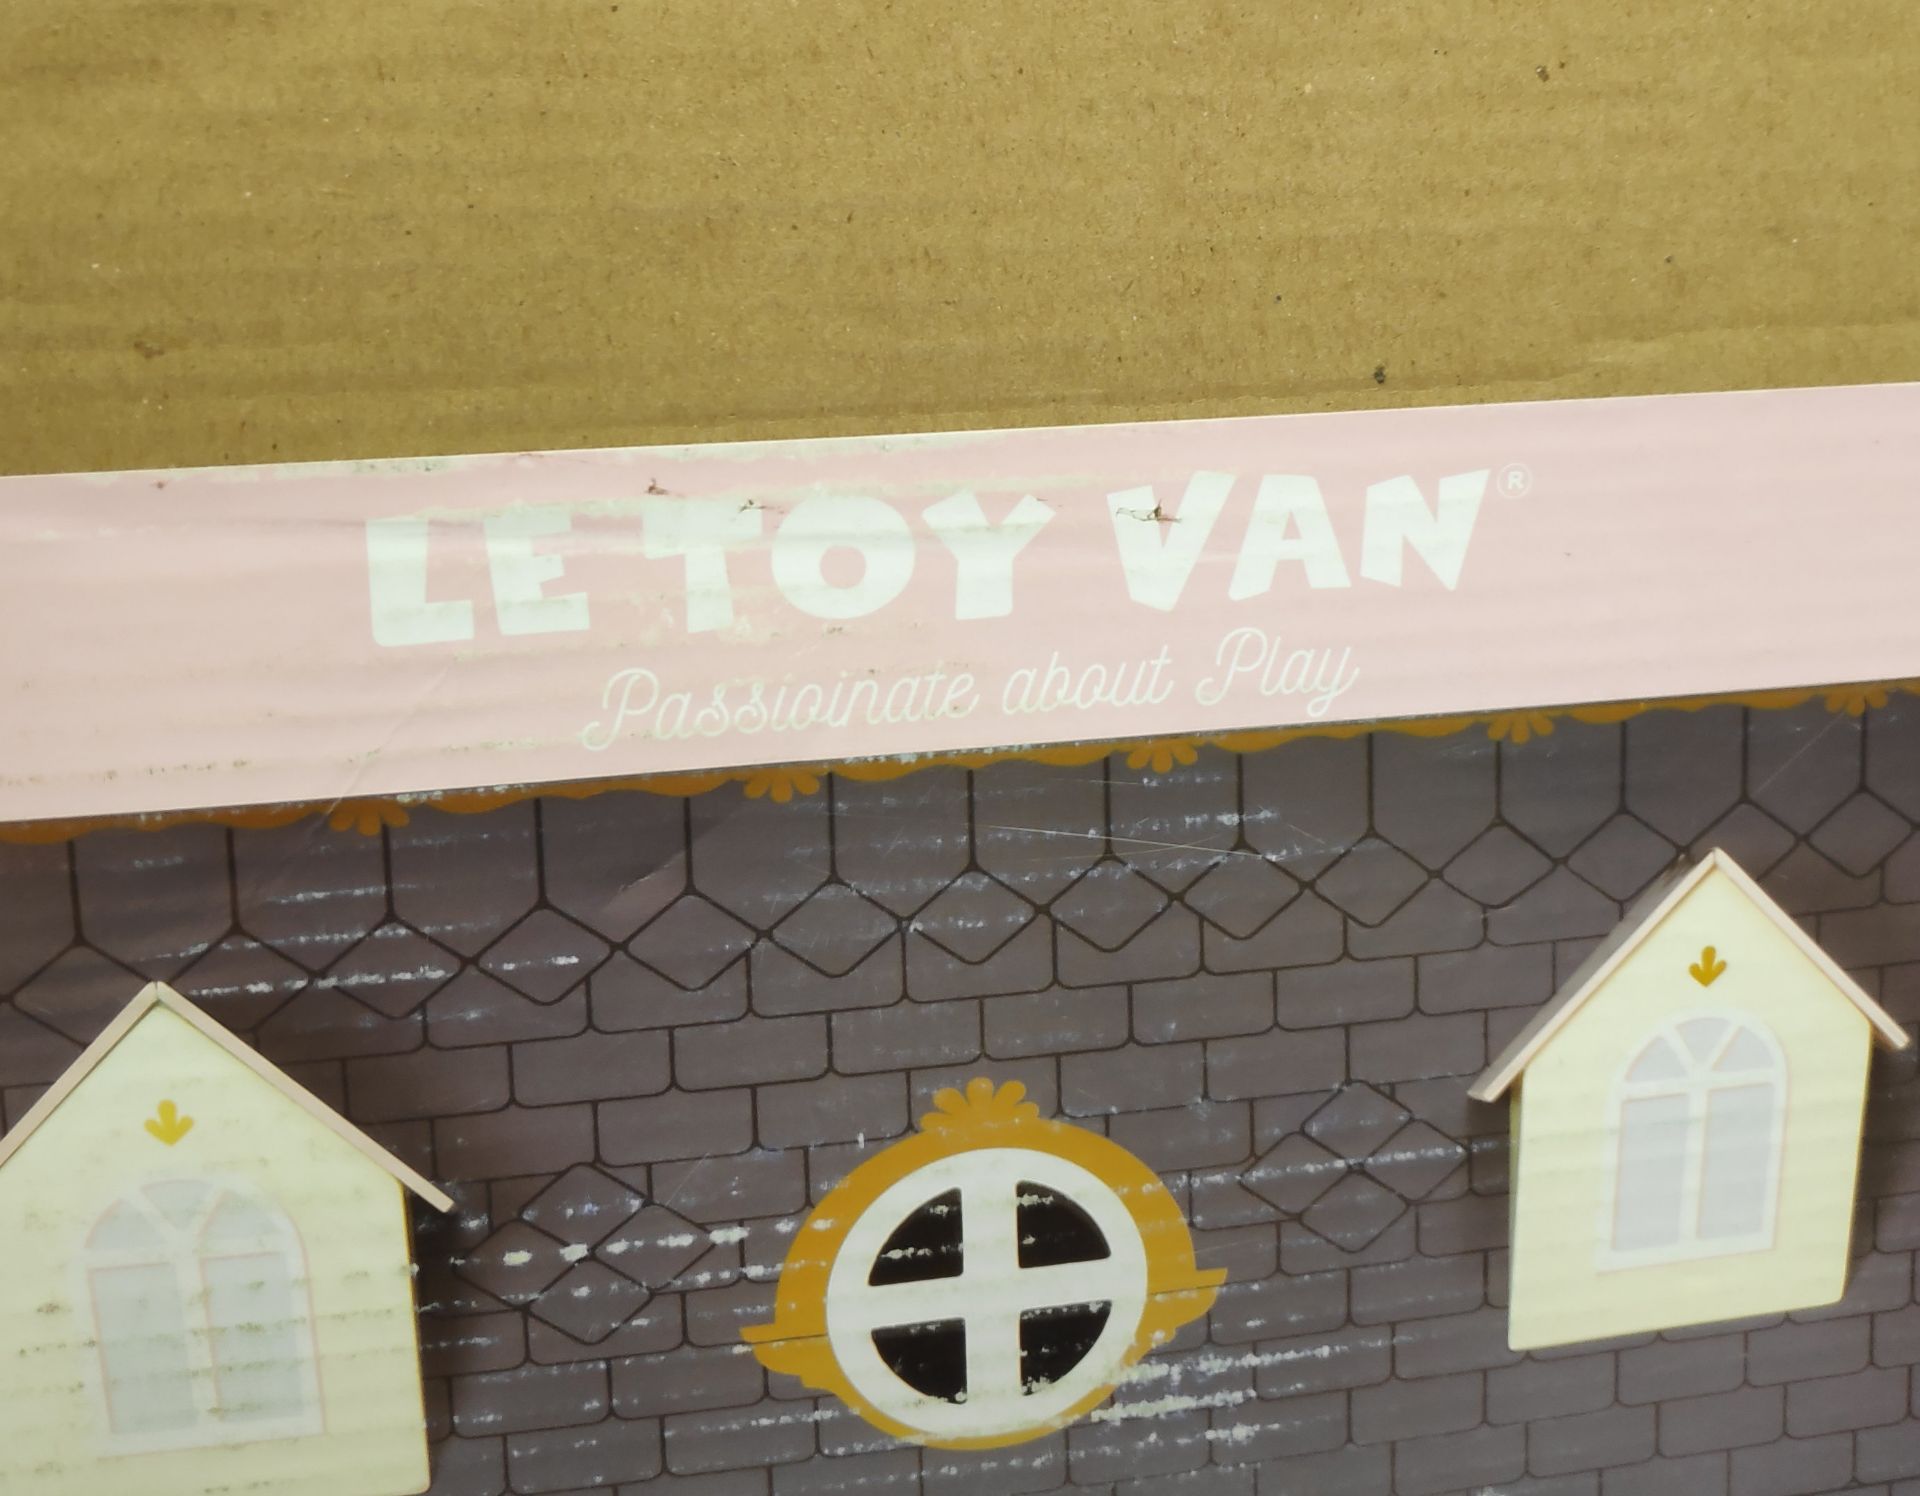 1 x Le Toy Van Wooden Palace Dolls House - New/Boxed - HTYS163 - CL987 - Location: Altrincham WA14 - - Image 6 of 10